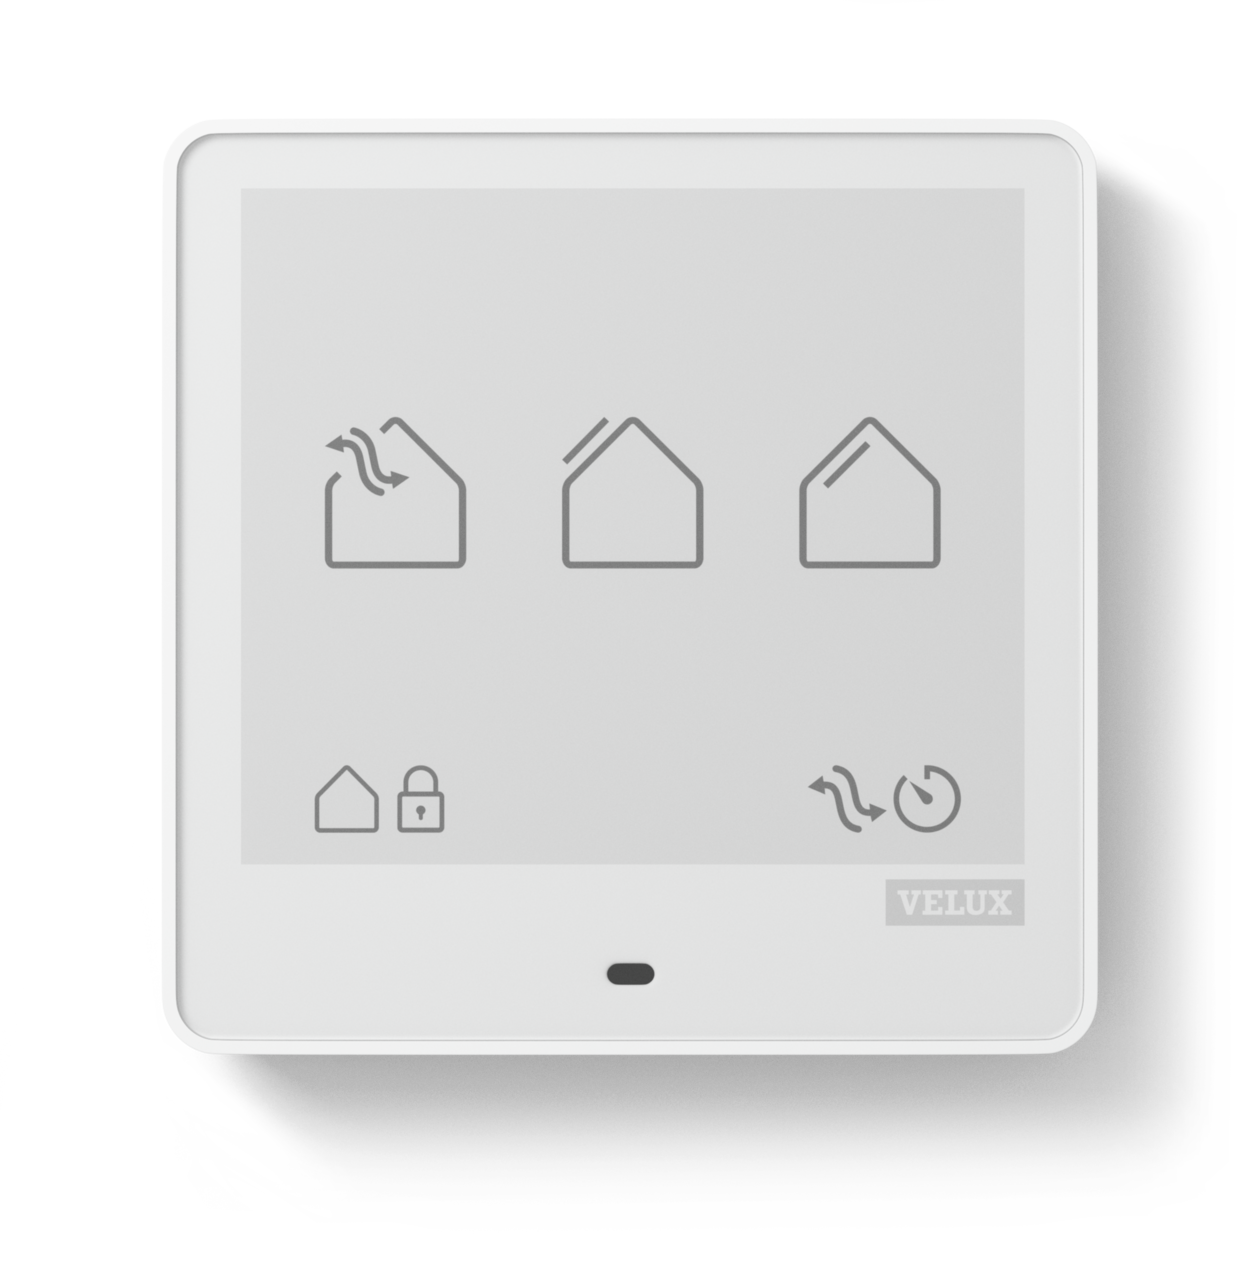 Image of a VELUX Touch control console